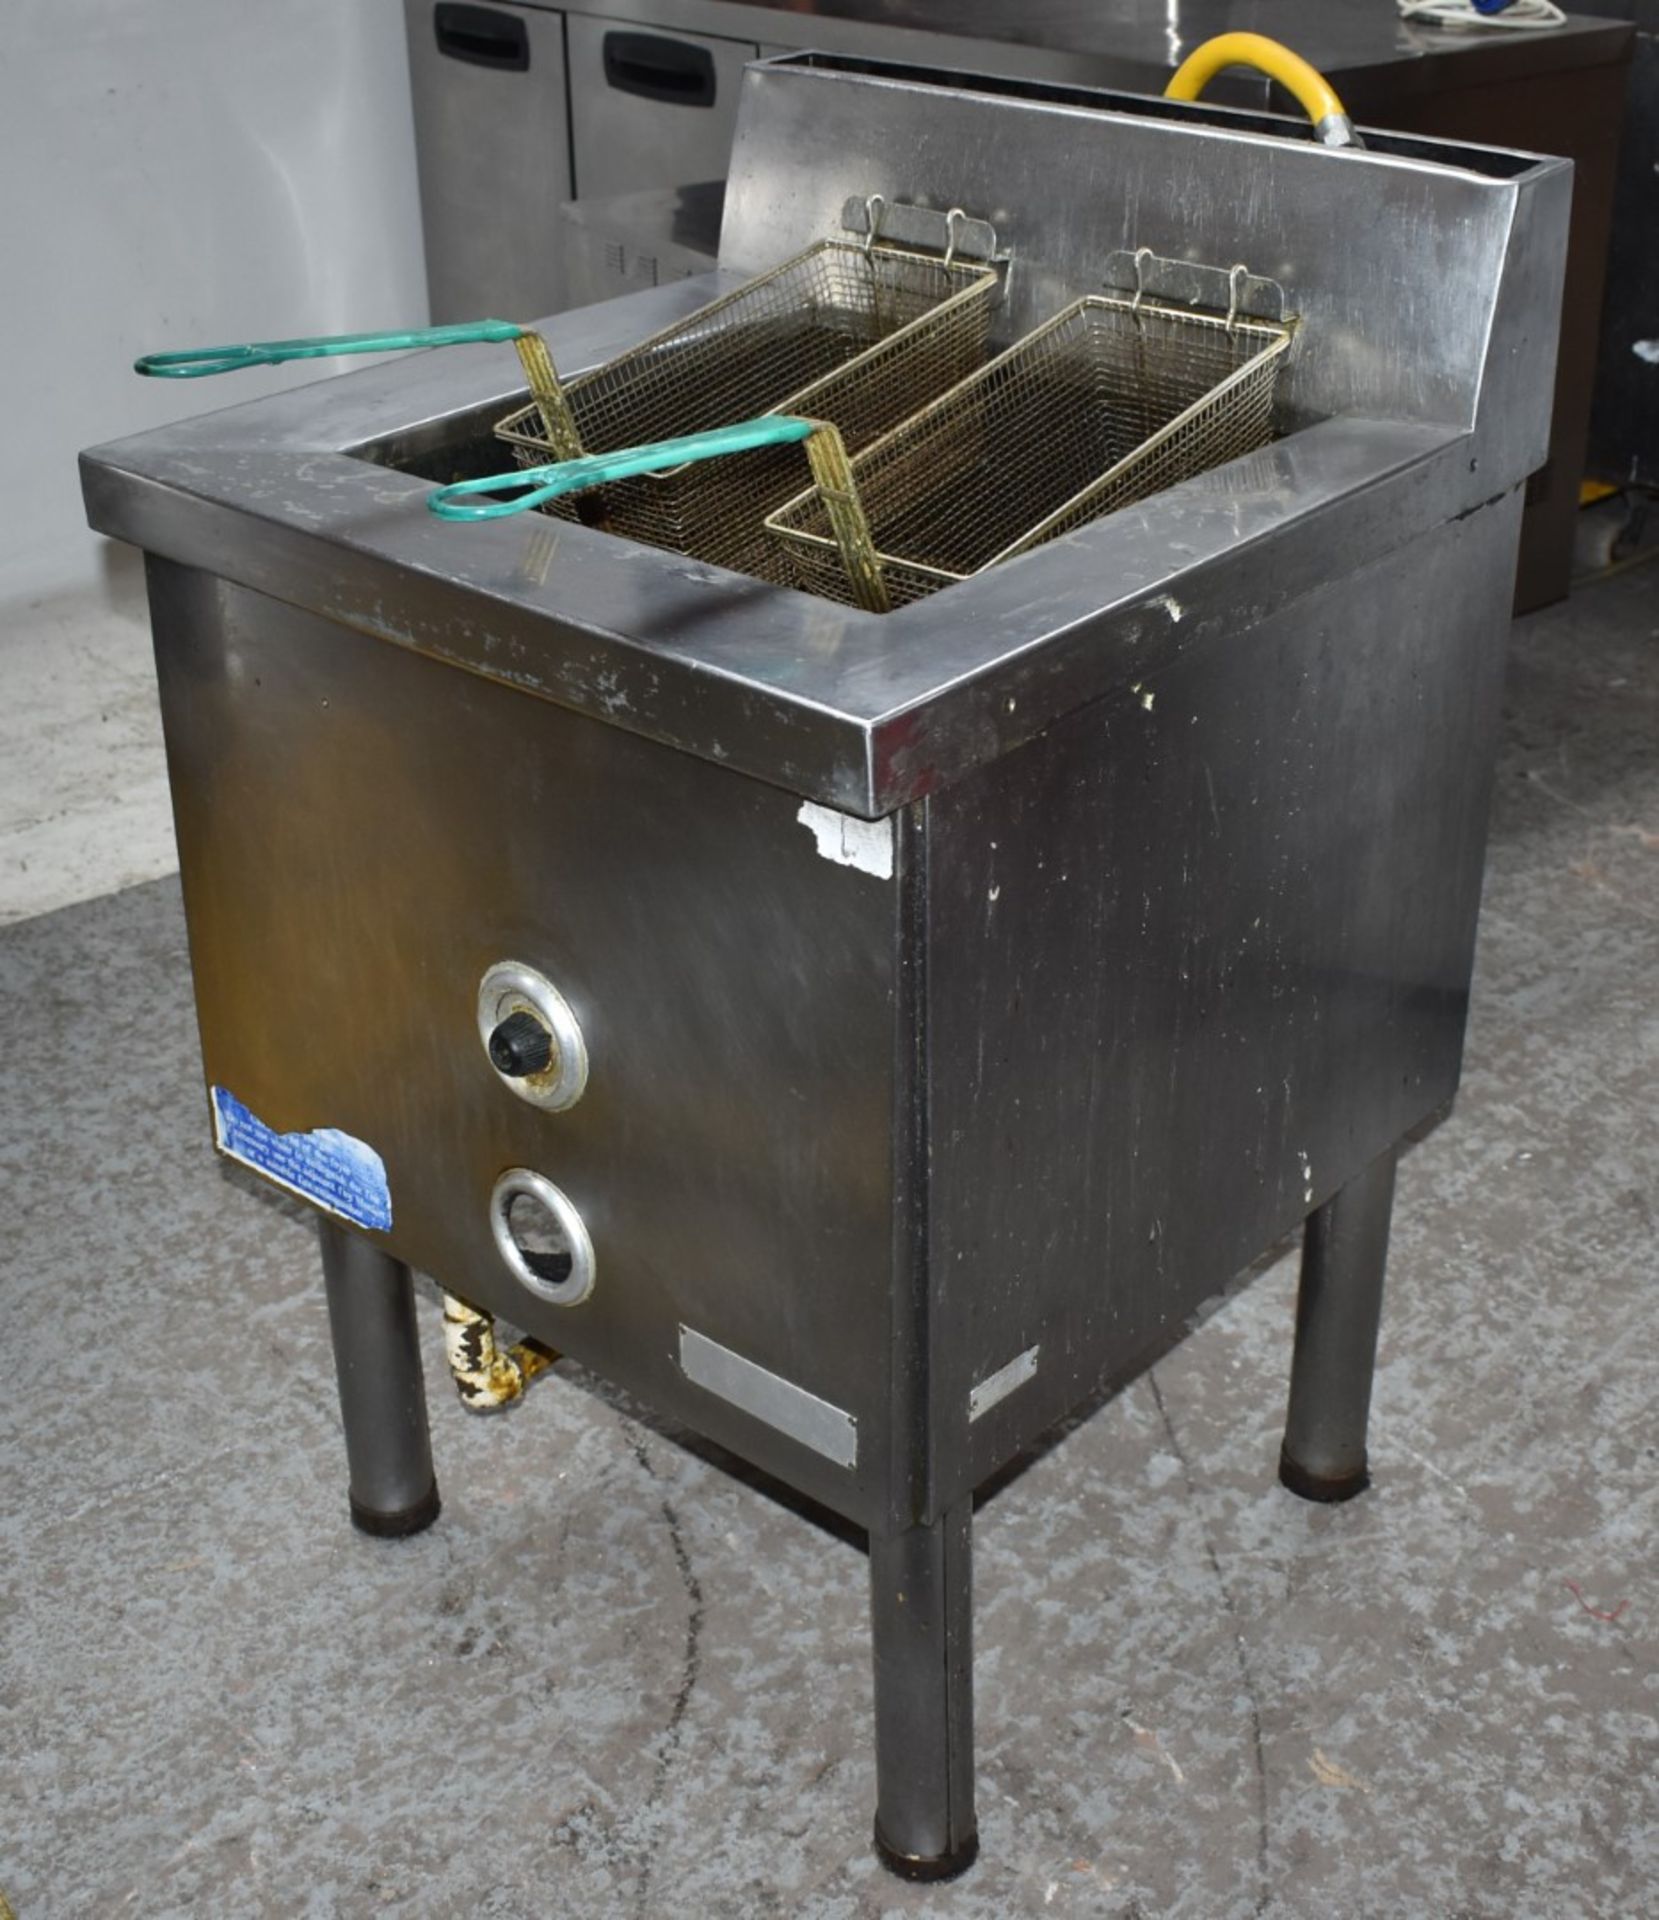 1 x Twin Basket Natural Gas Fryer With Stainless Steel Finish - H89 x W65.5 x D70 cms - CL459 - - Image 6 of 7